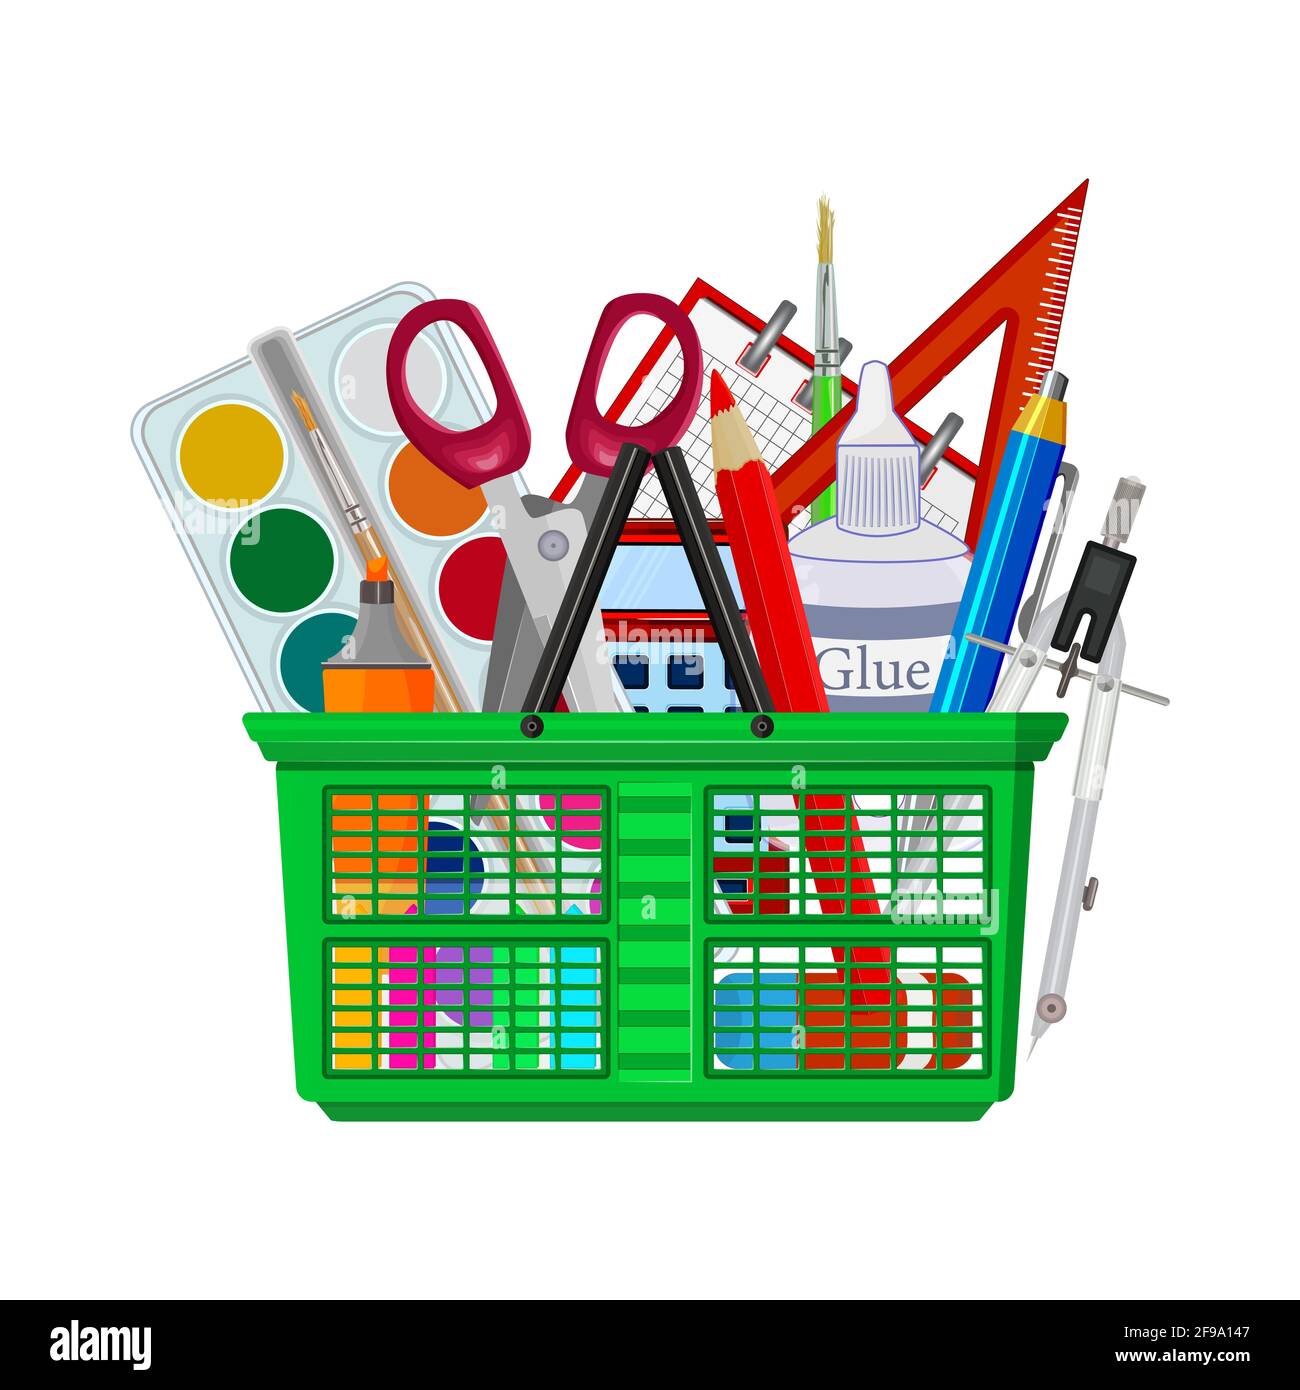 https://c8.alamy.com/comp/2F9A147/shopping-cart-with-stationery-and-office-supplies-isolated-on-white-backgroundpurchases-to-studyback-to-schooleducation-conceptvector-illustration-2F9A147.jpg